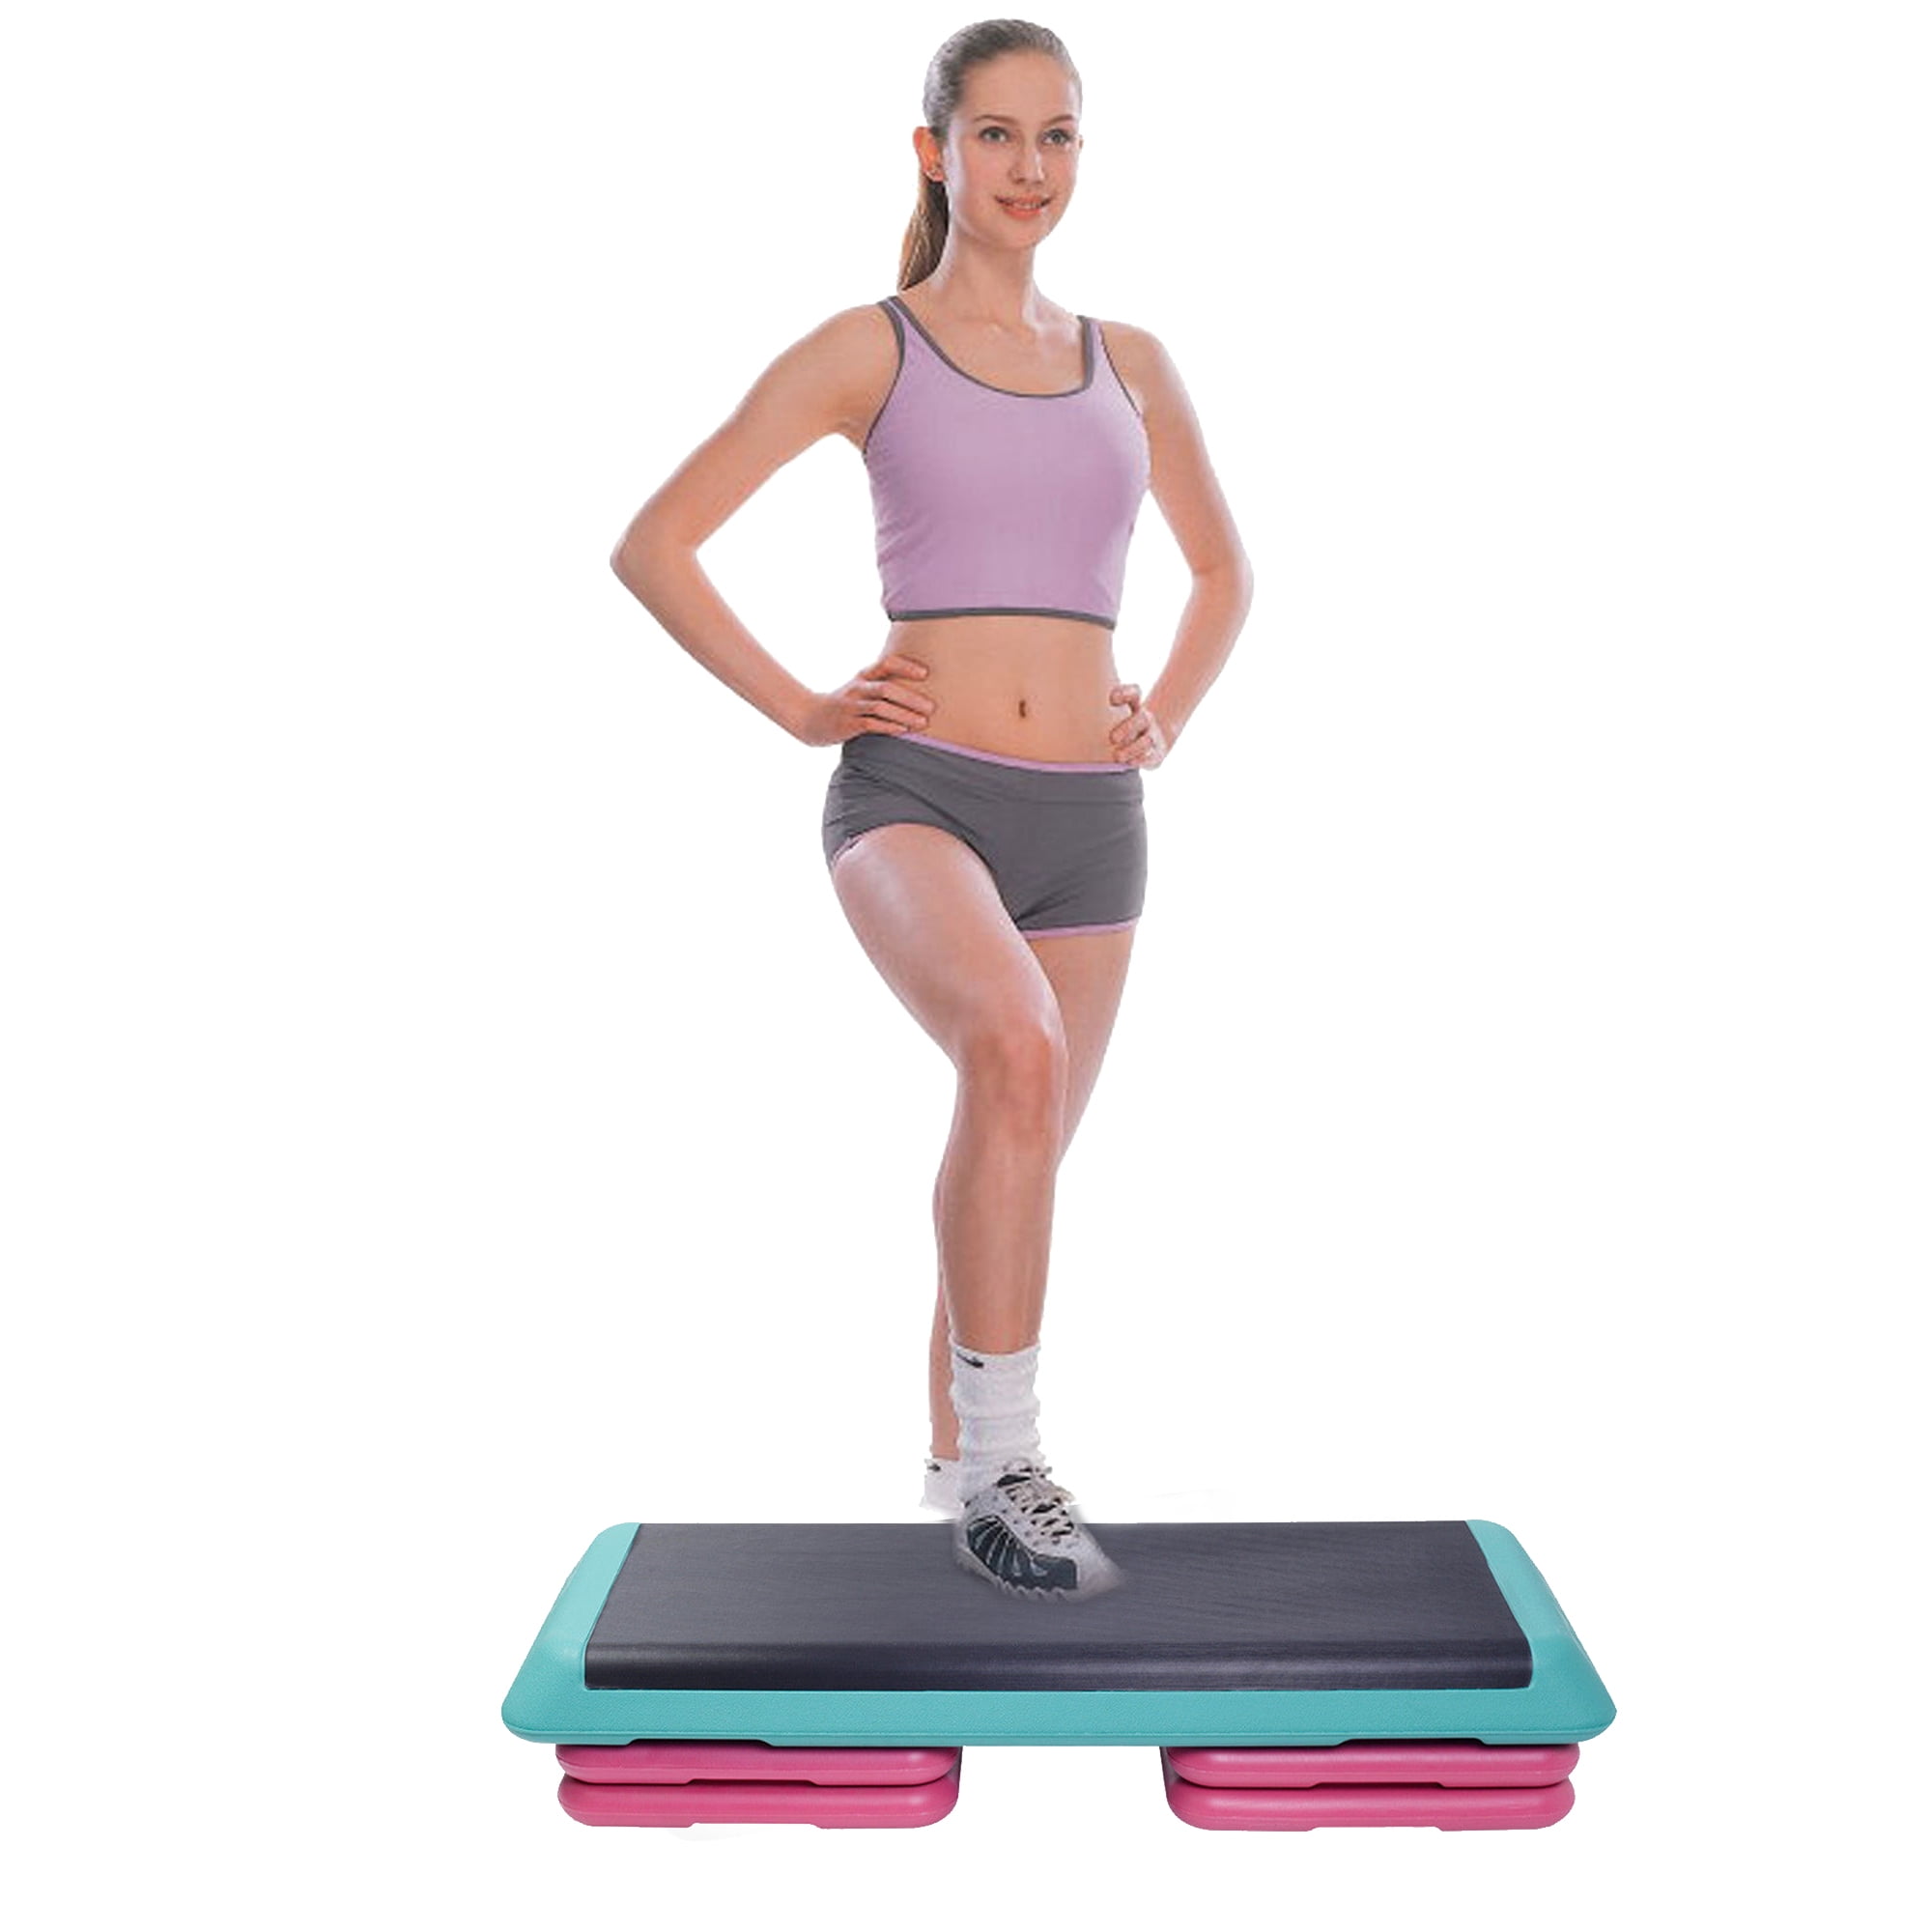 SPORFIT Aerobic Step Platform for Exercise w/Risers,Workout Step Height Adjustable 5-7-9,Fitness Step 450lbs Capacity,Non-Slip Exercise Step Deck for Home/Gym 